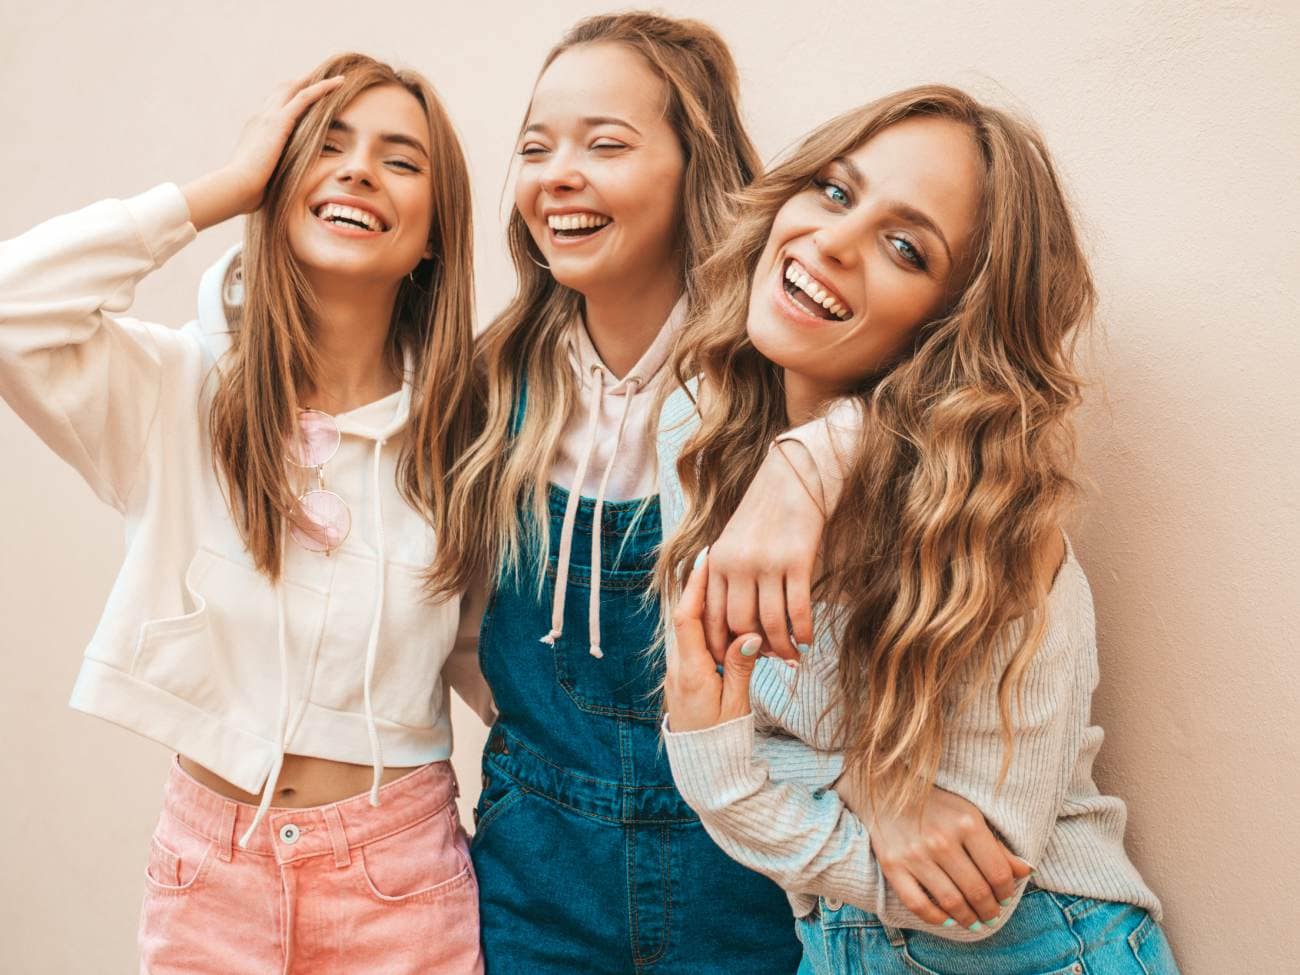 Three young girls smiling and laughing